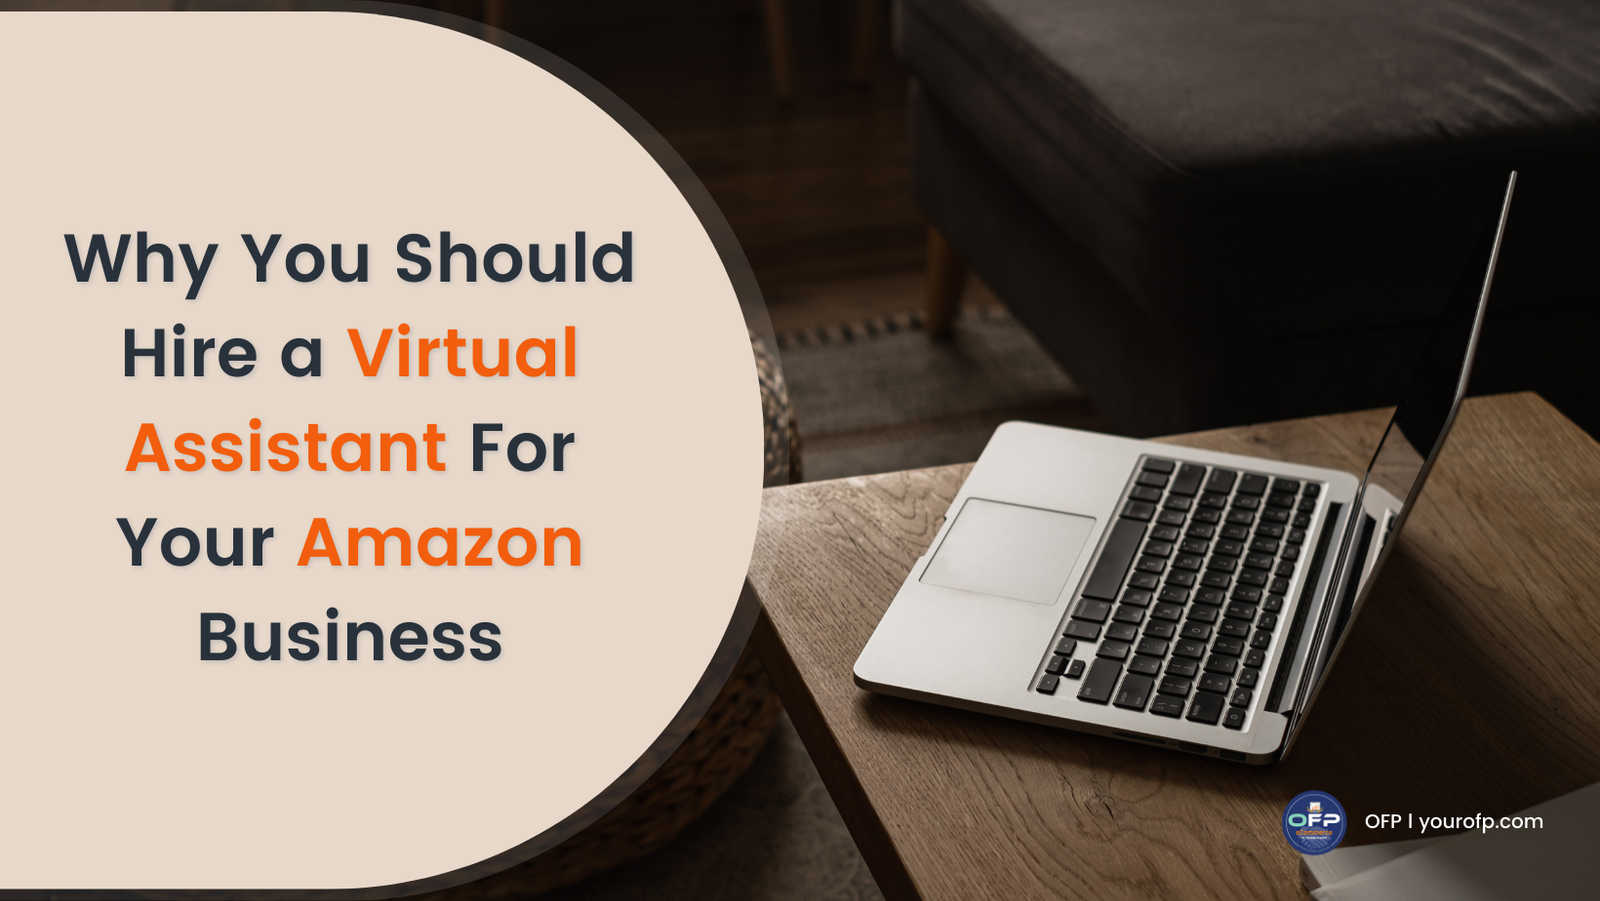 Why You Should Hire a Virtual Assistant For Your Amazon Business